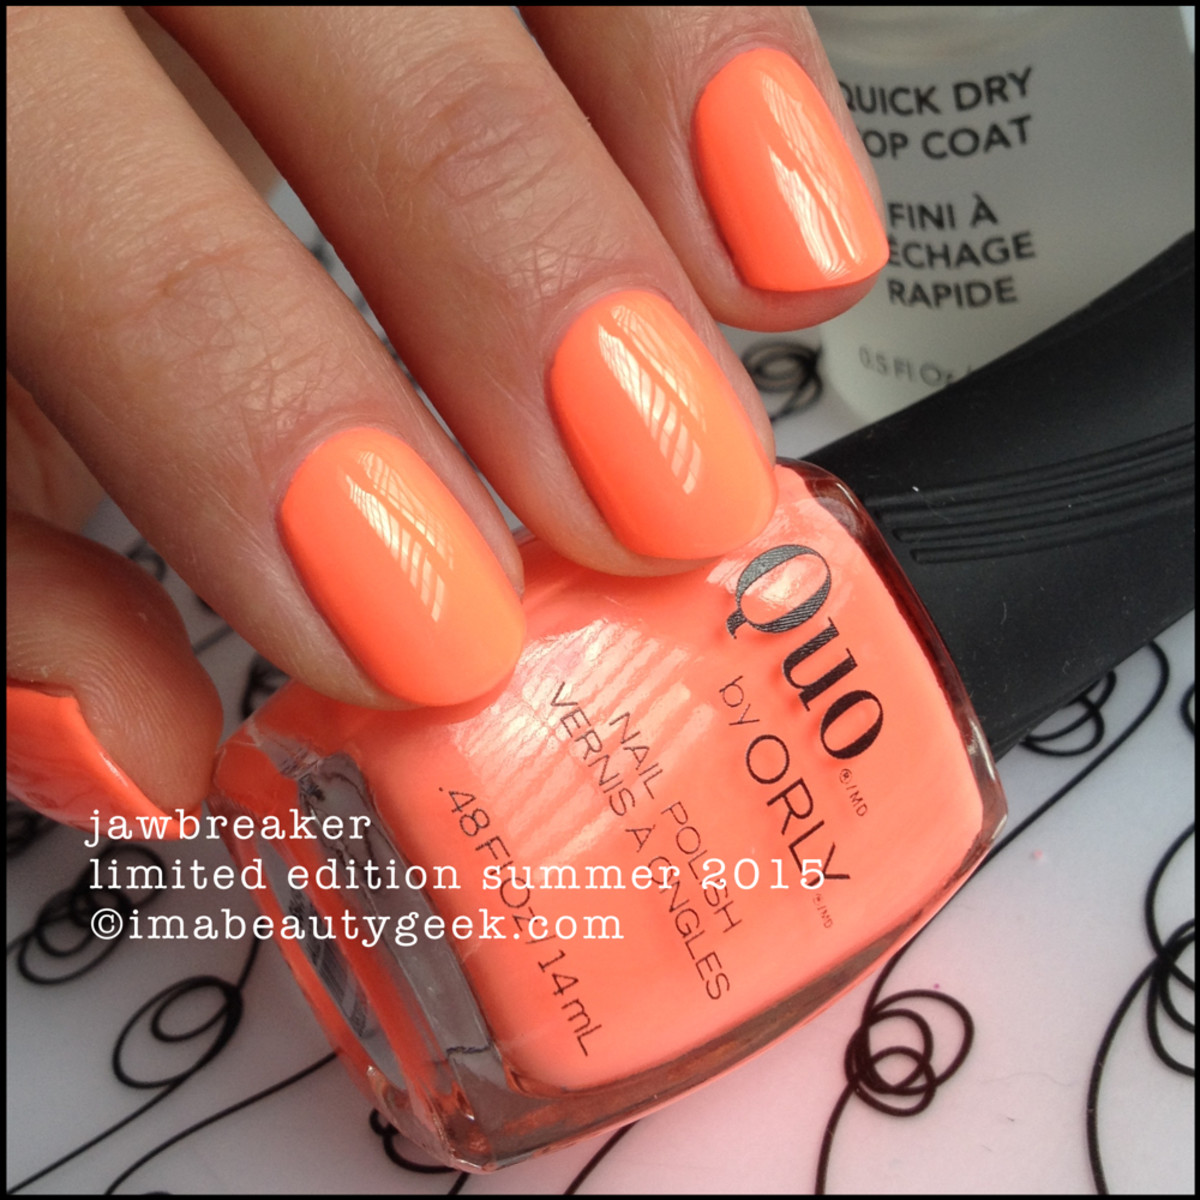 Quo by Orly Jawbreaker aka Orly Push the Limit Summer 2015